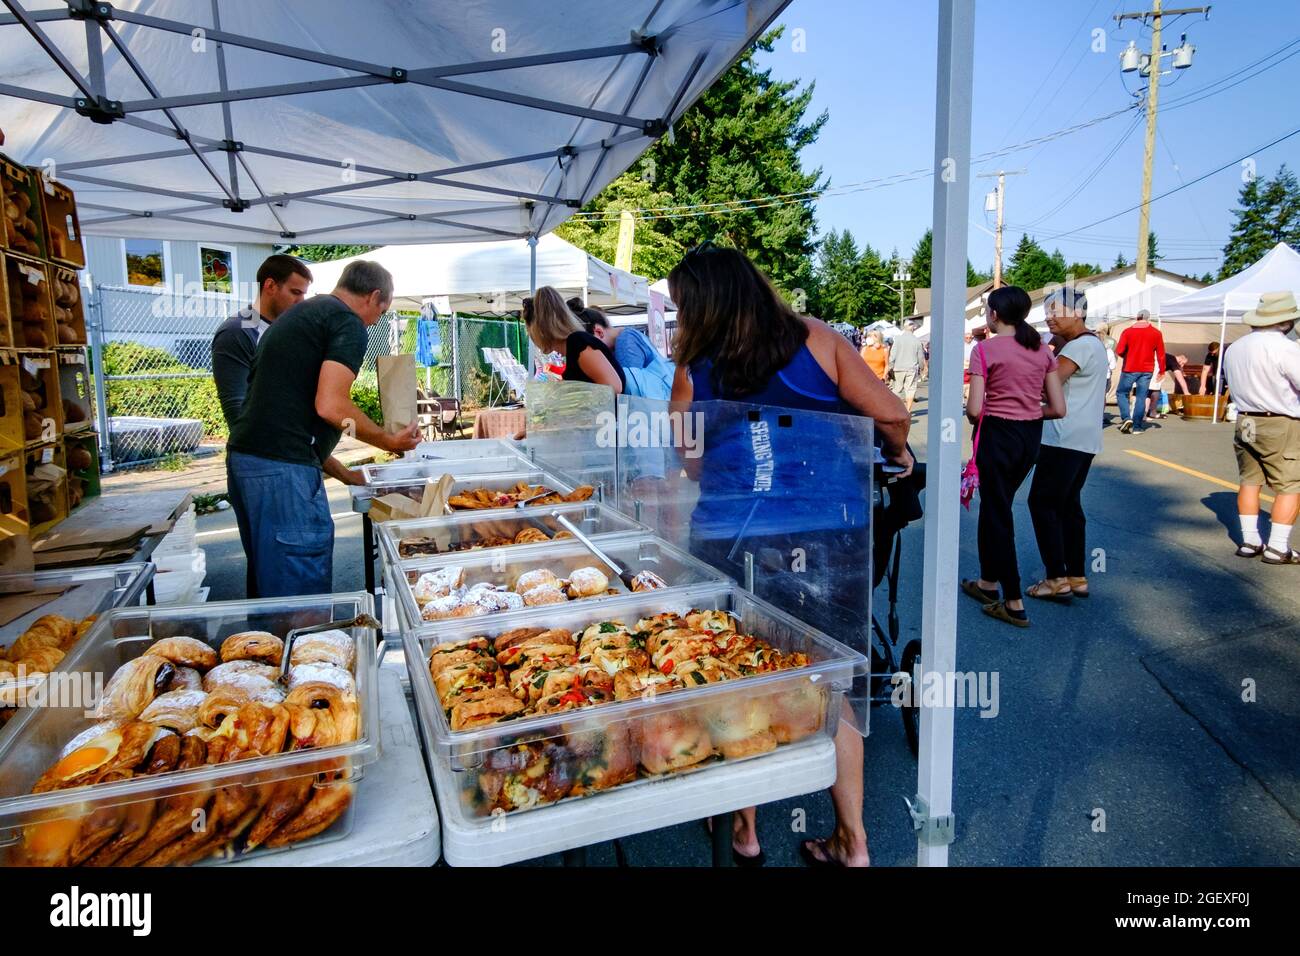 Customers purchasing baked goods from Bodhi's Artisan Bakery at the Qualicum Beach, British Columbia, Canada farmer's market Stock Photo